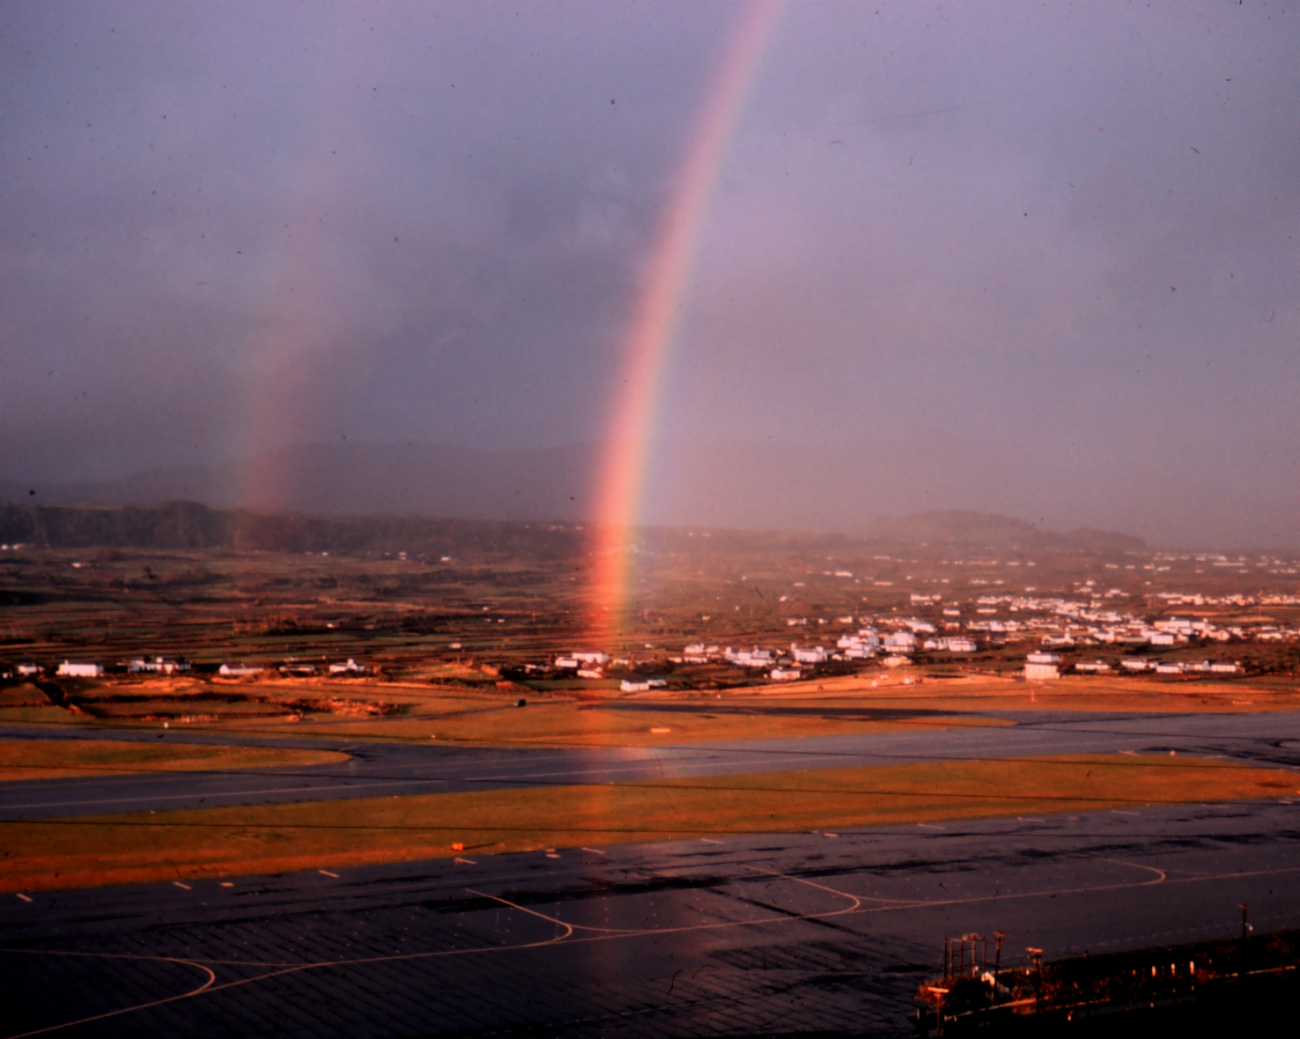 Double rainbow over an unknown airport